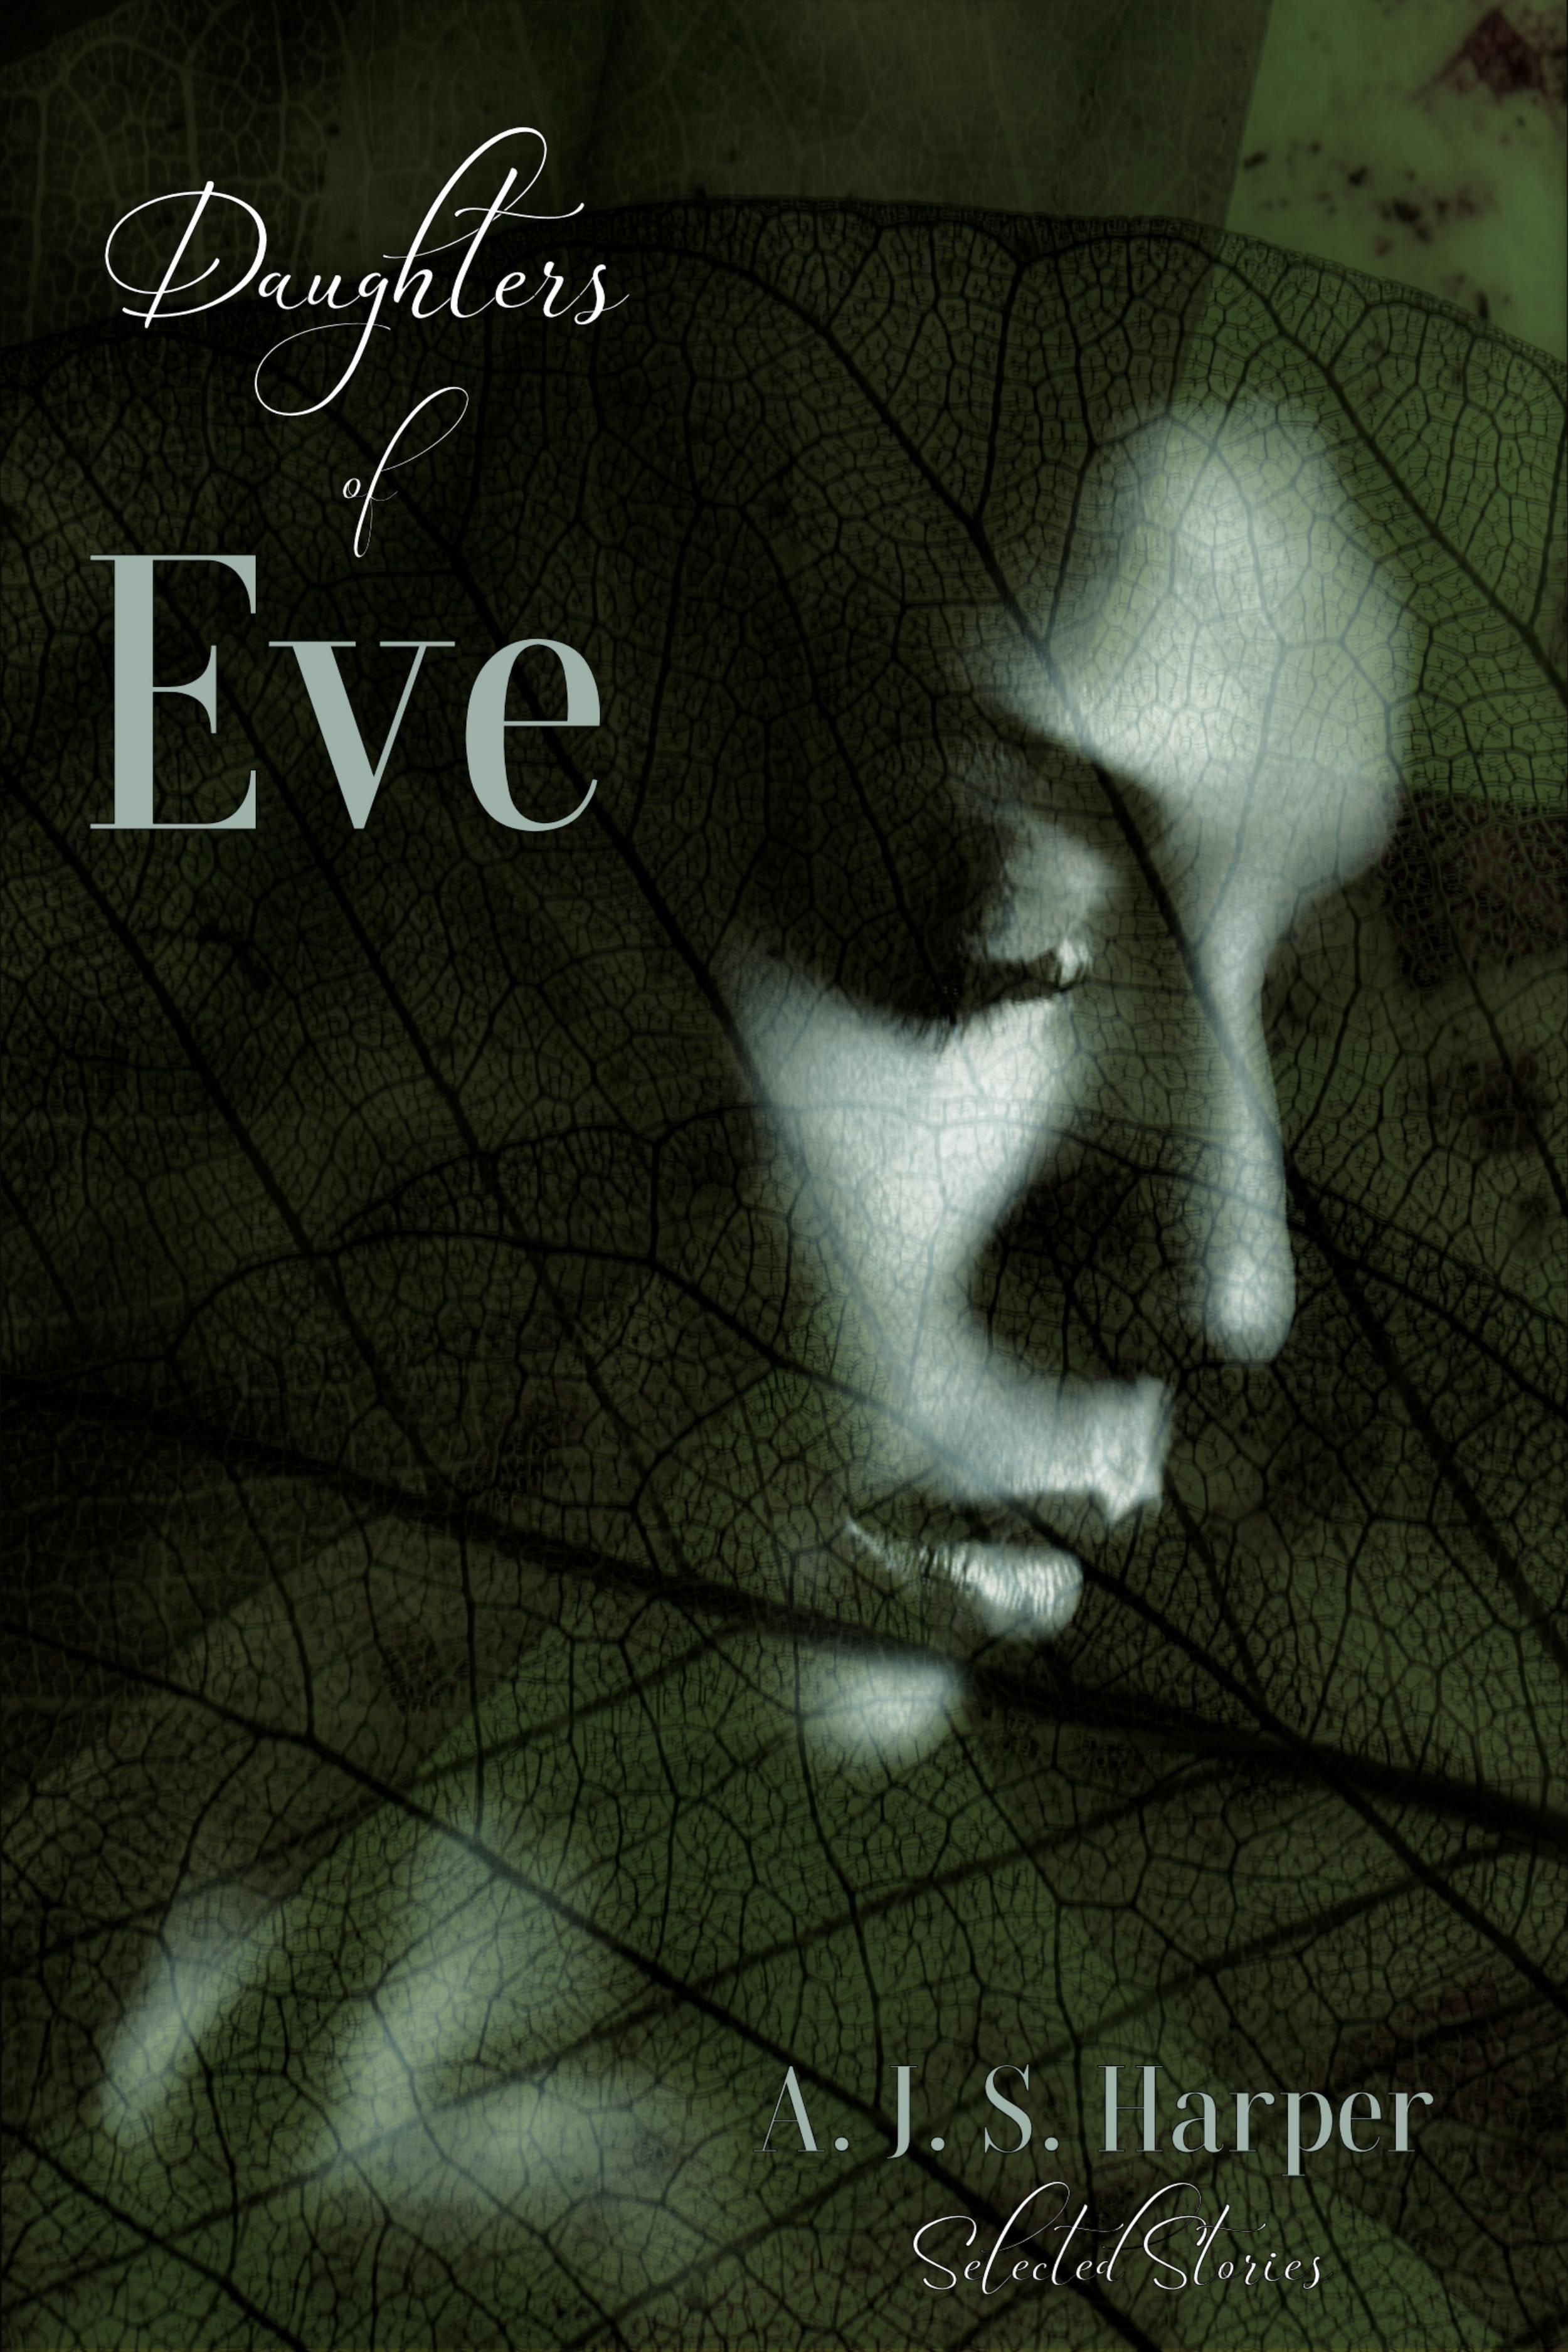 daughters of eve by lois duncan